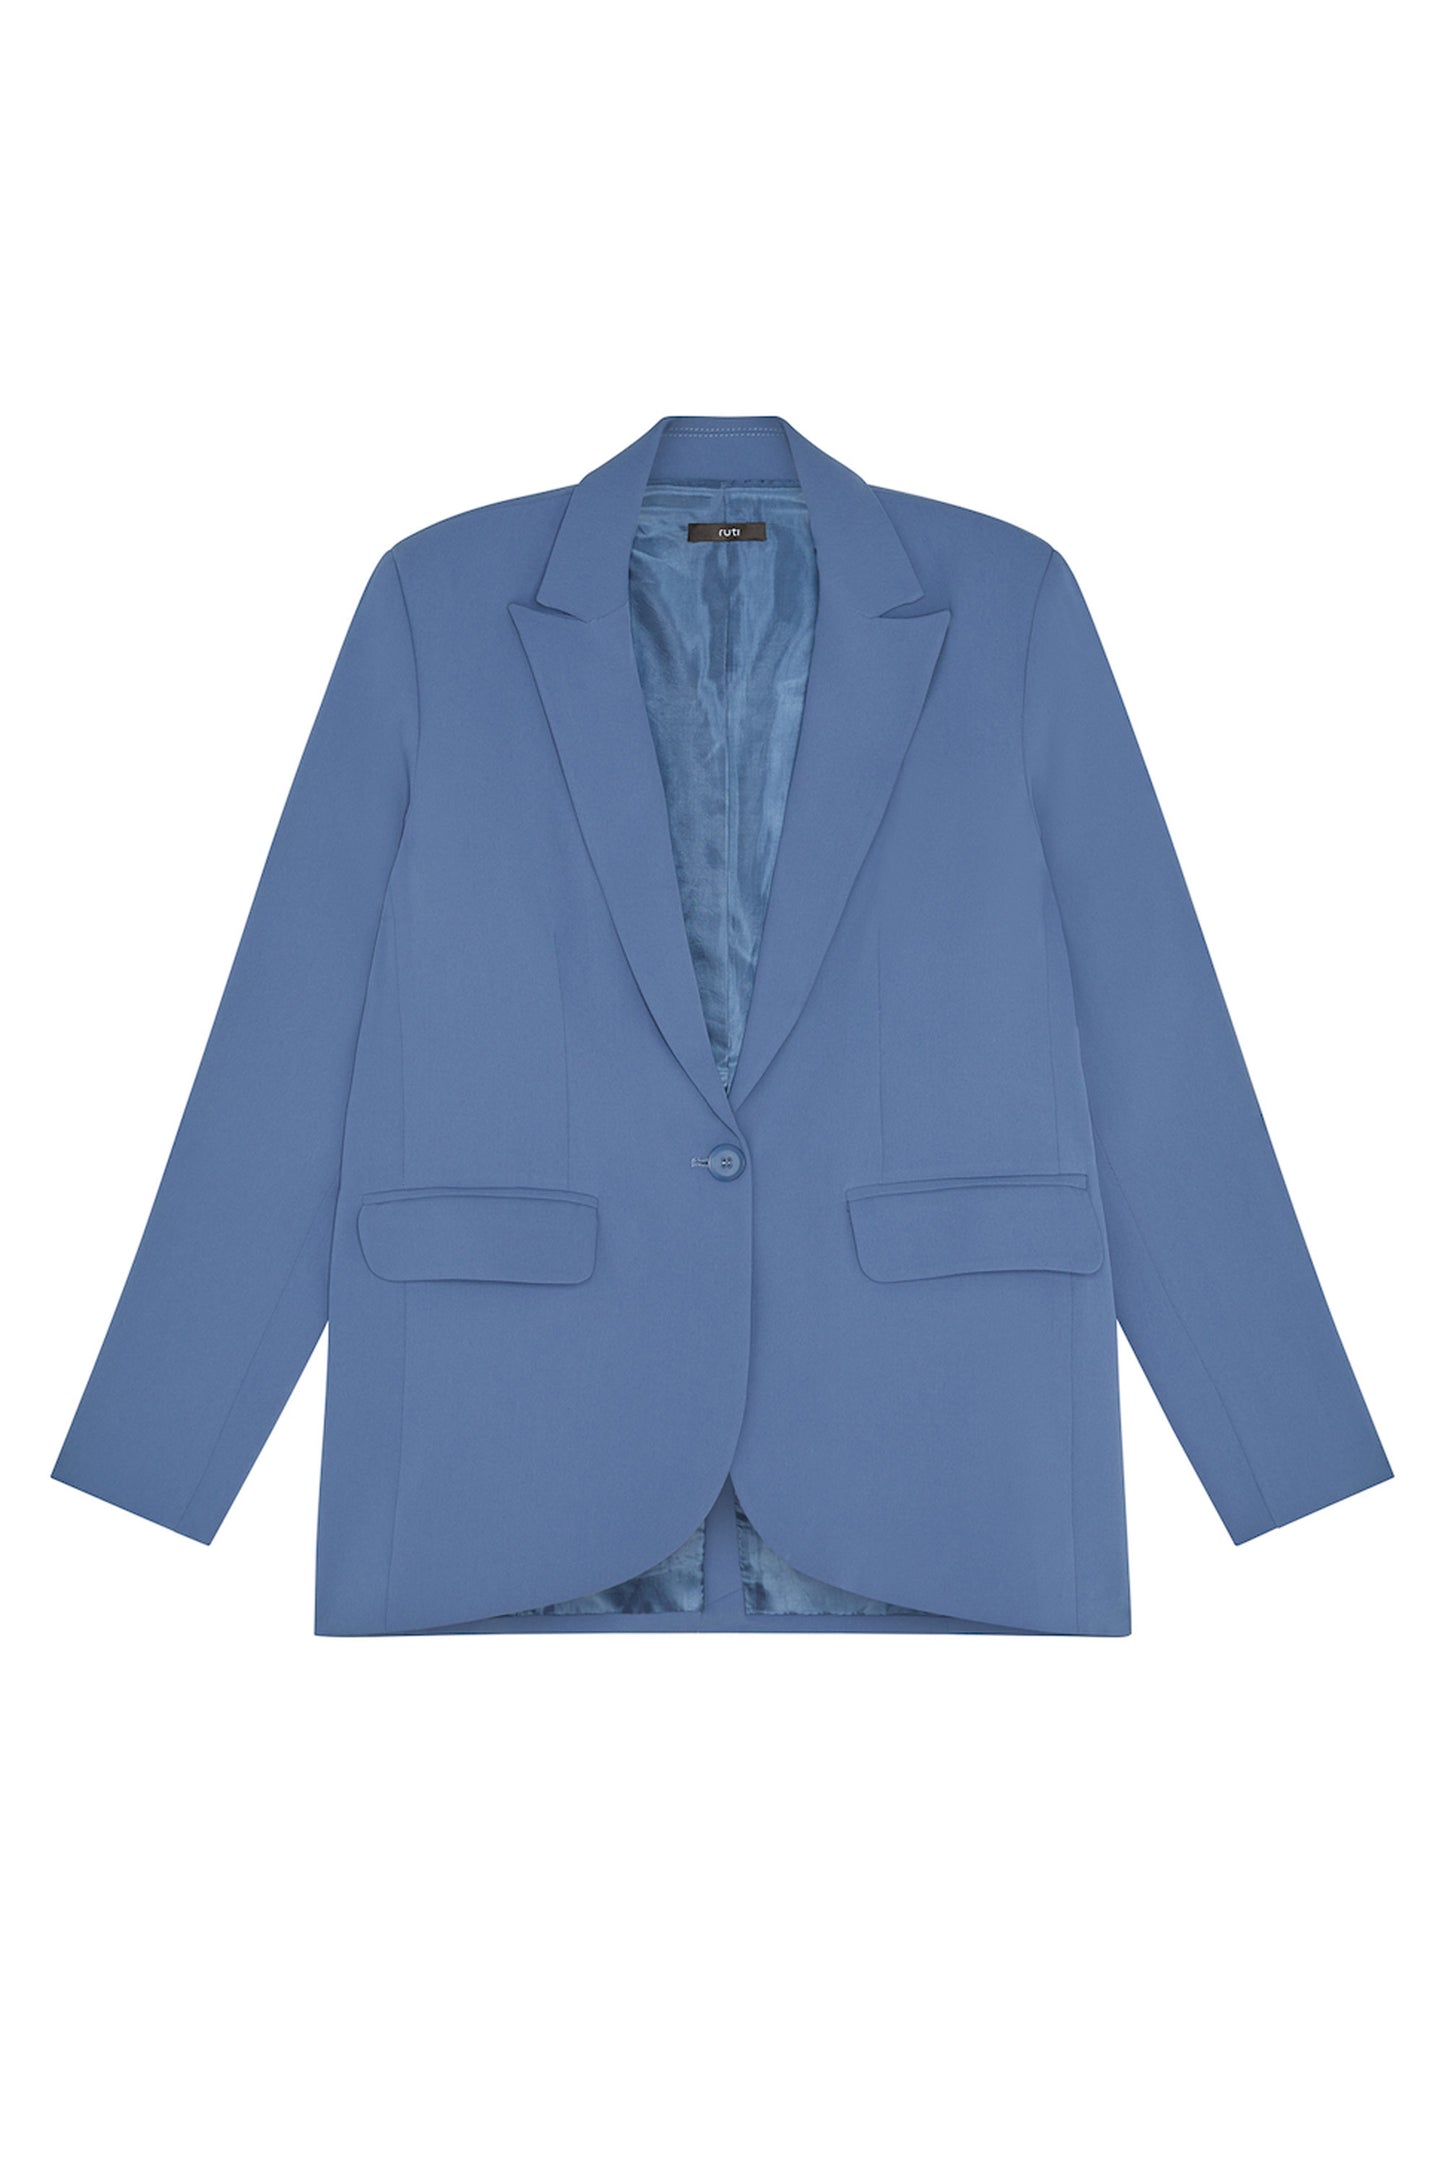 The Classic Blazer That Upgrades You.